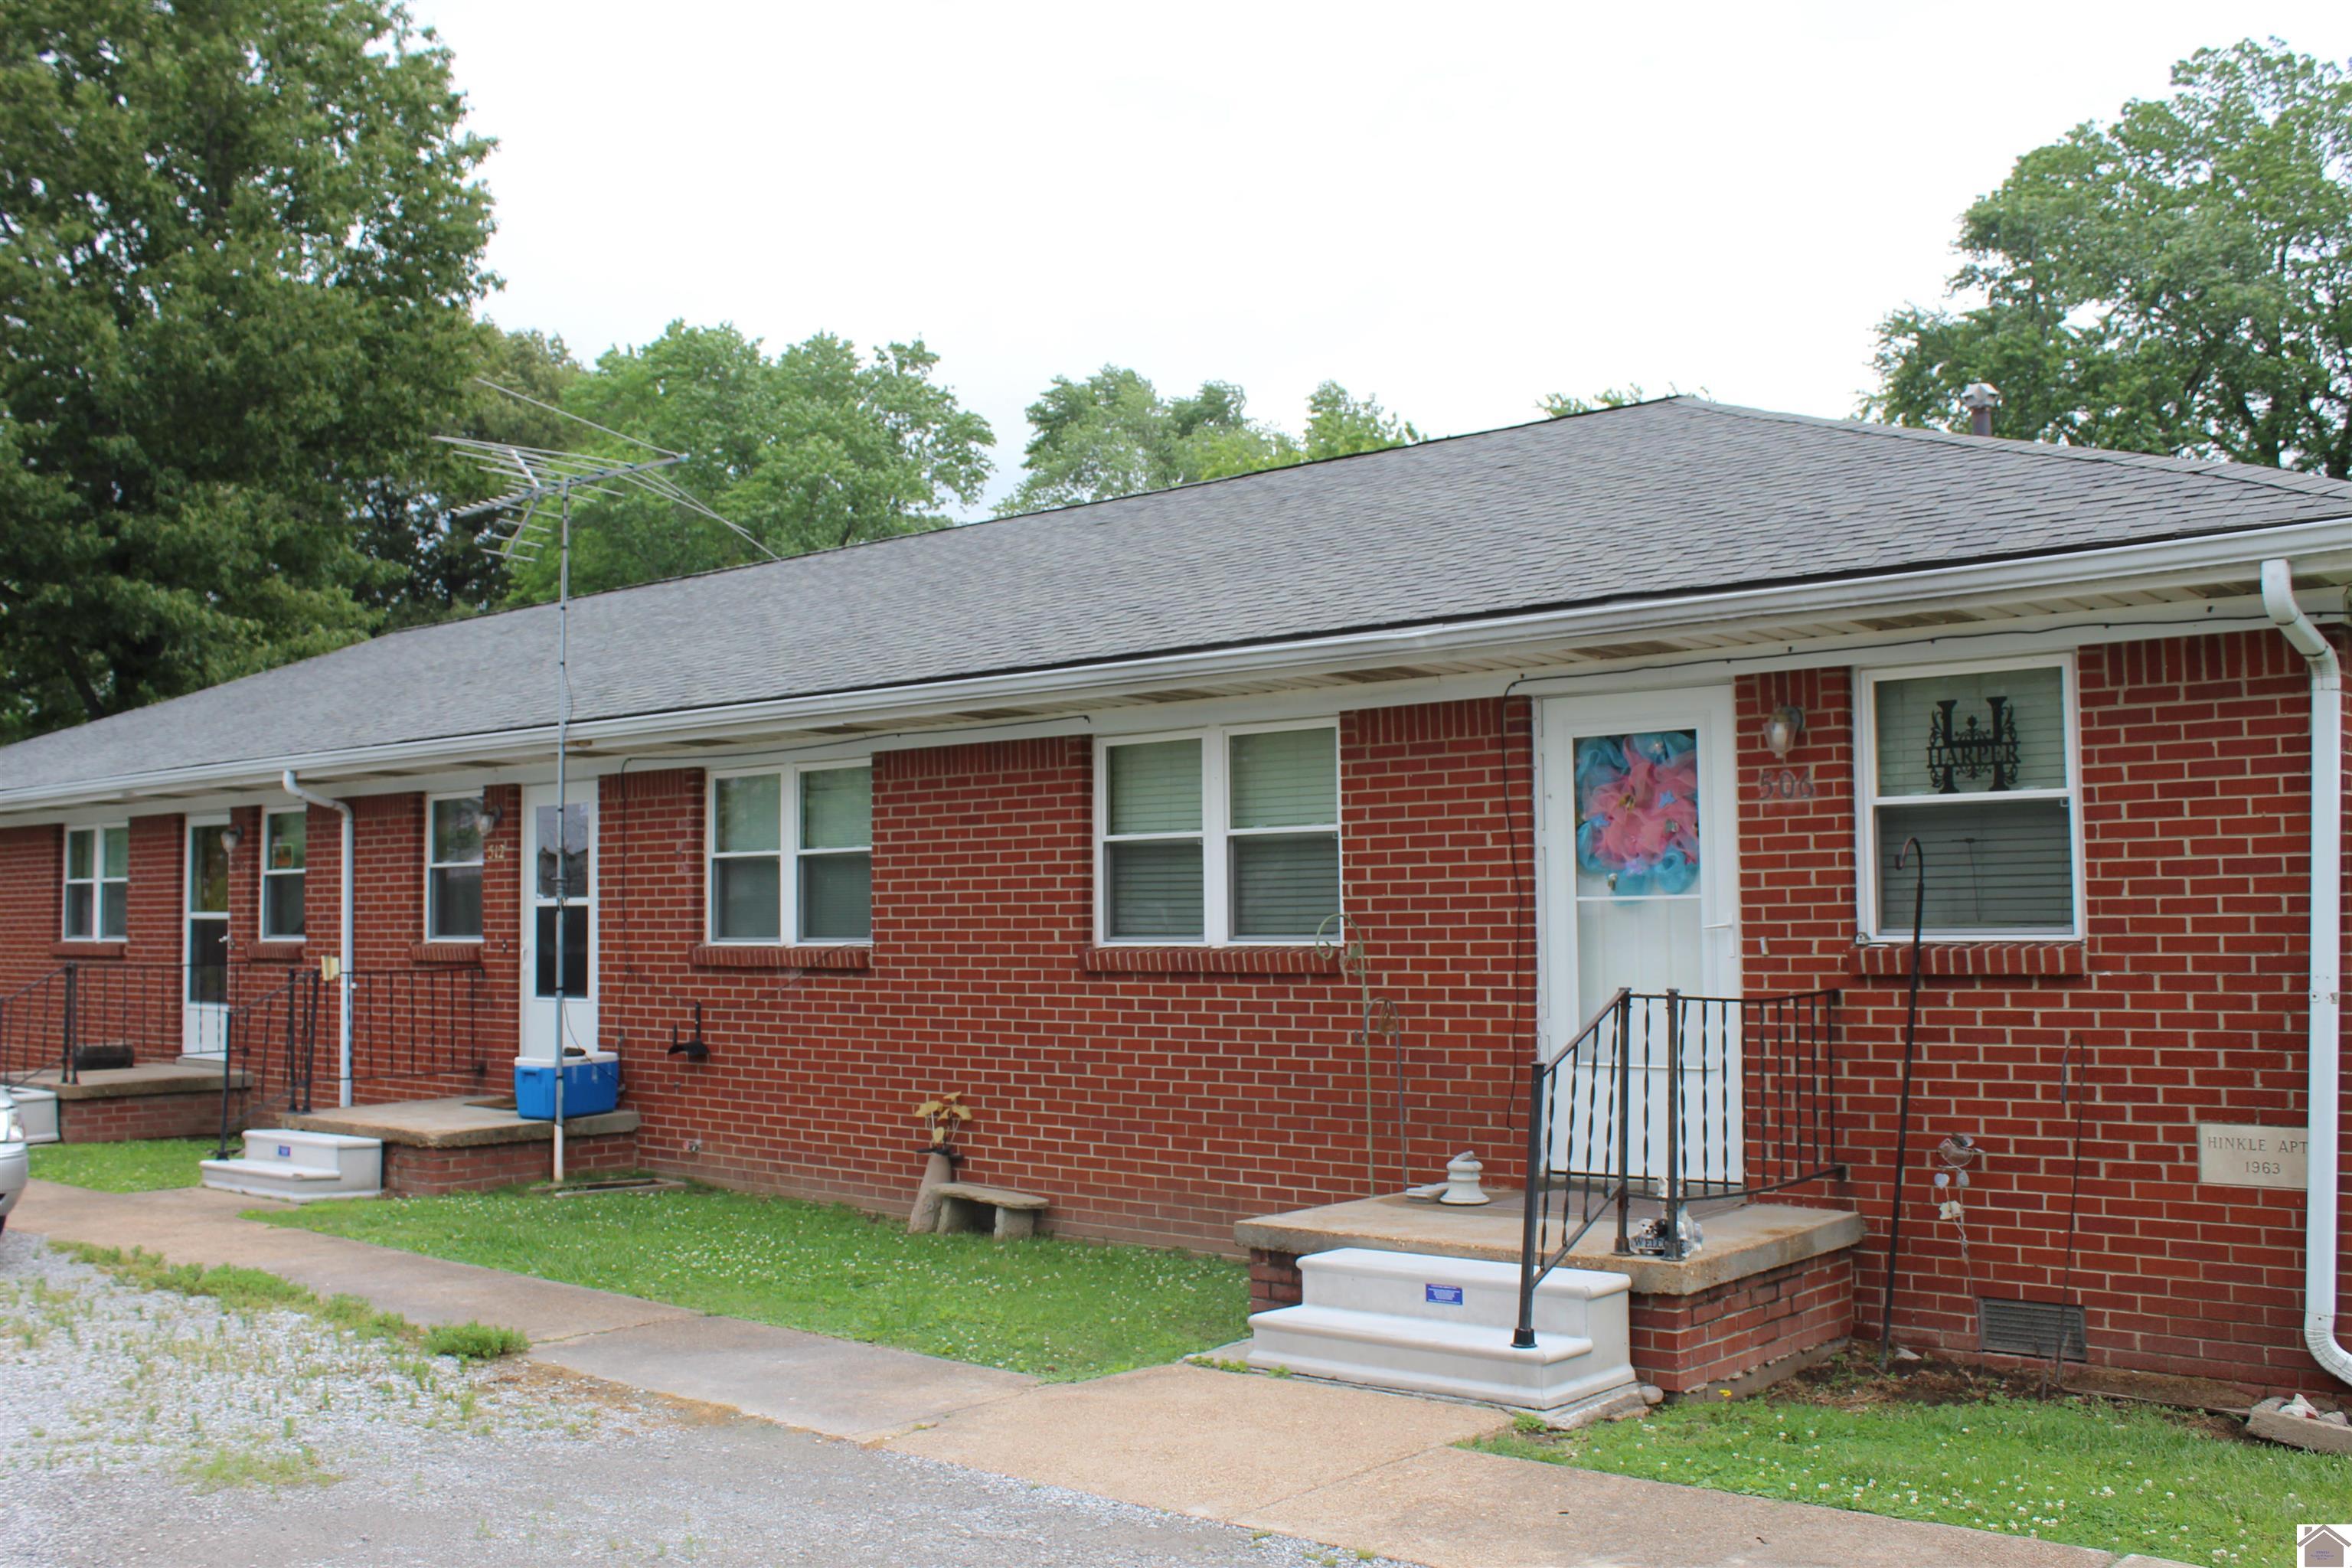 106-130 East 5th, LaCenter, KY 42056 Listing Photo  4